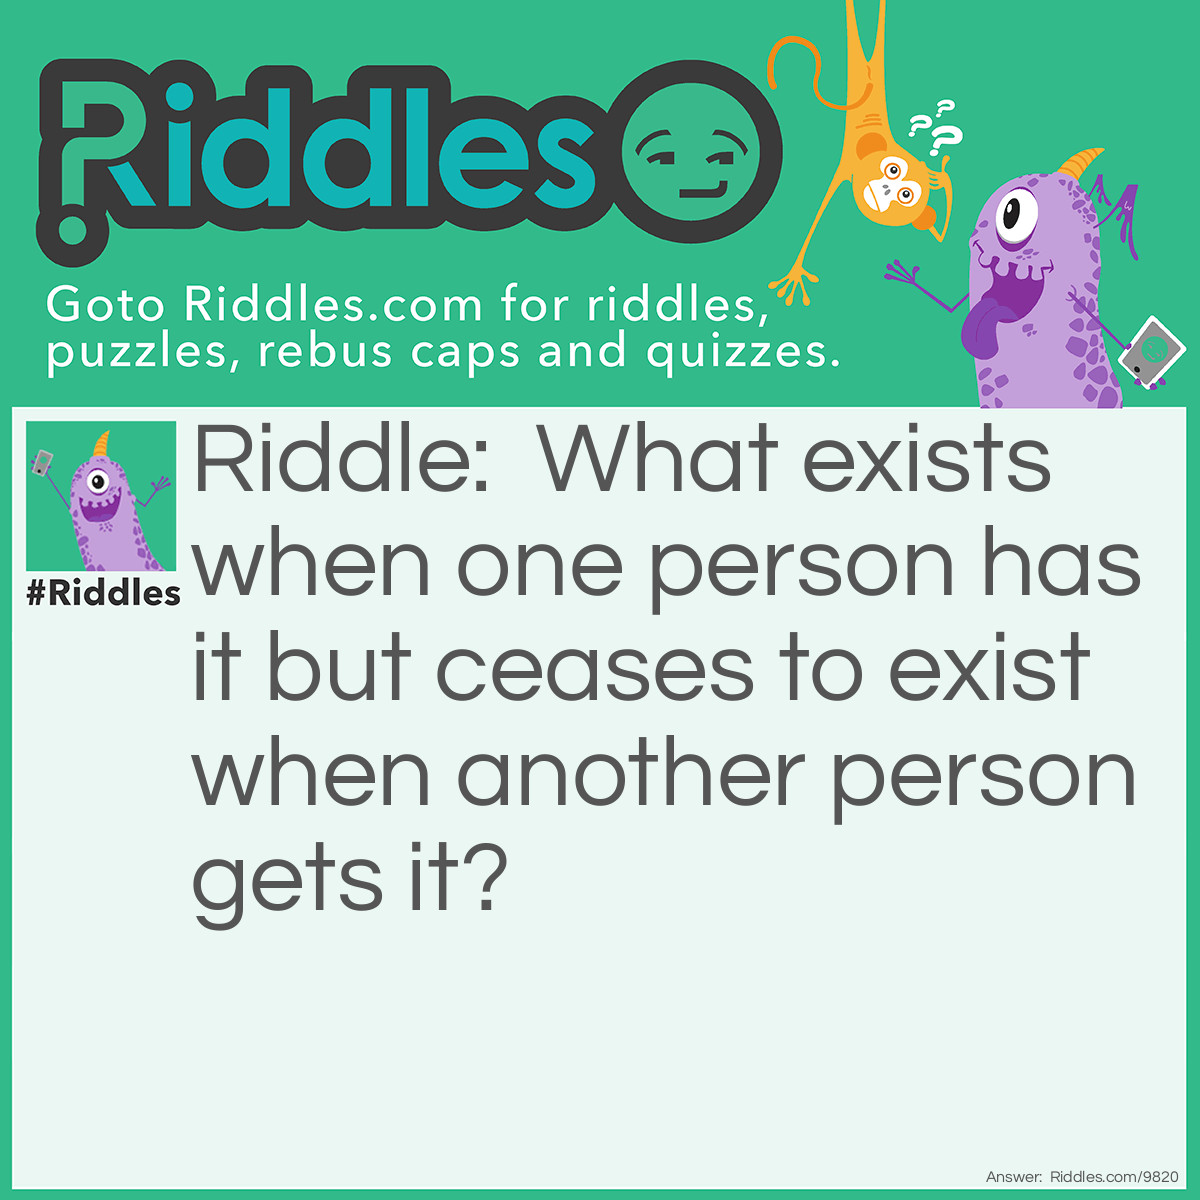 Riddle: What exists when one person has it but ceases to exist when another person gets it? Answer: A Secret.